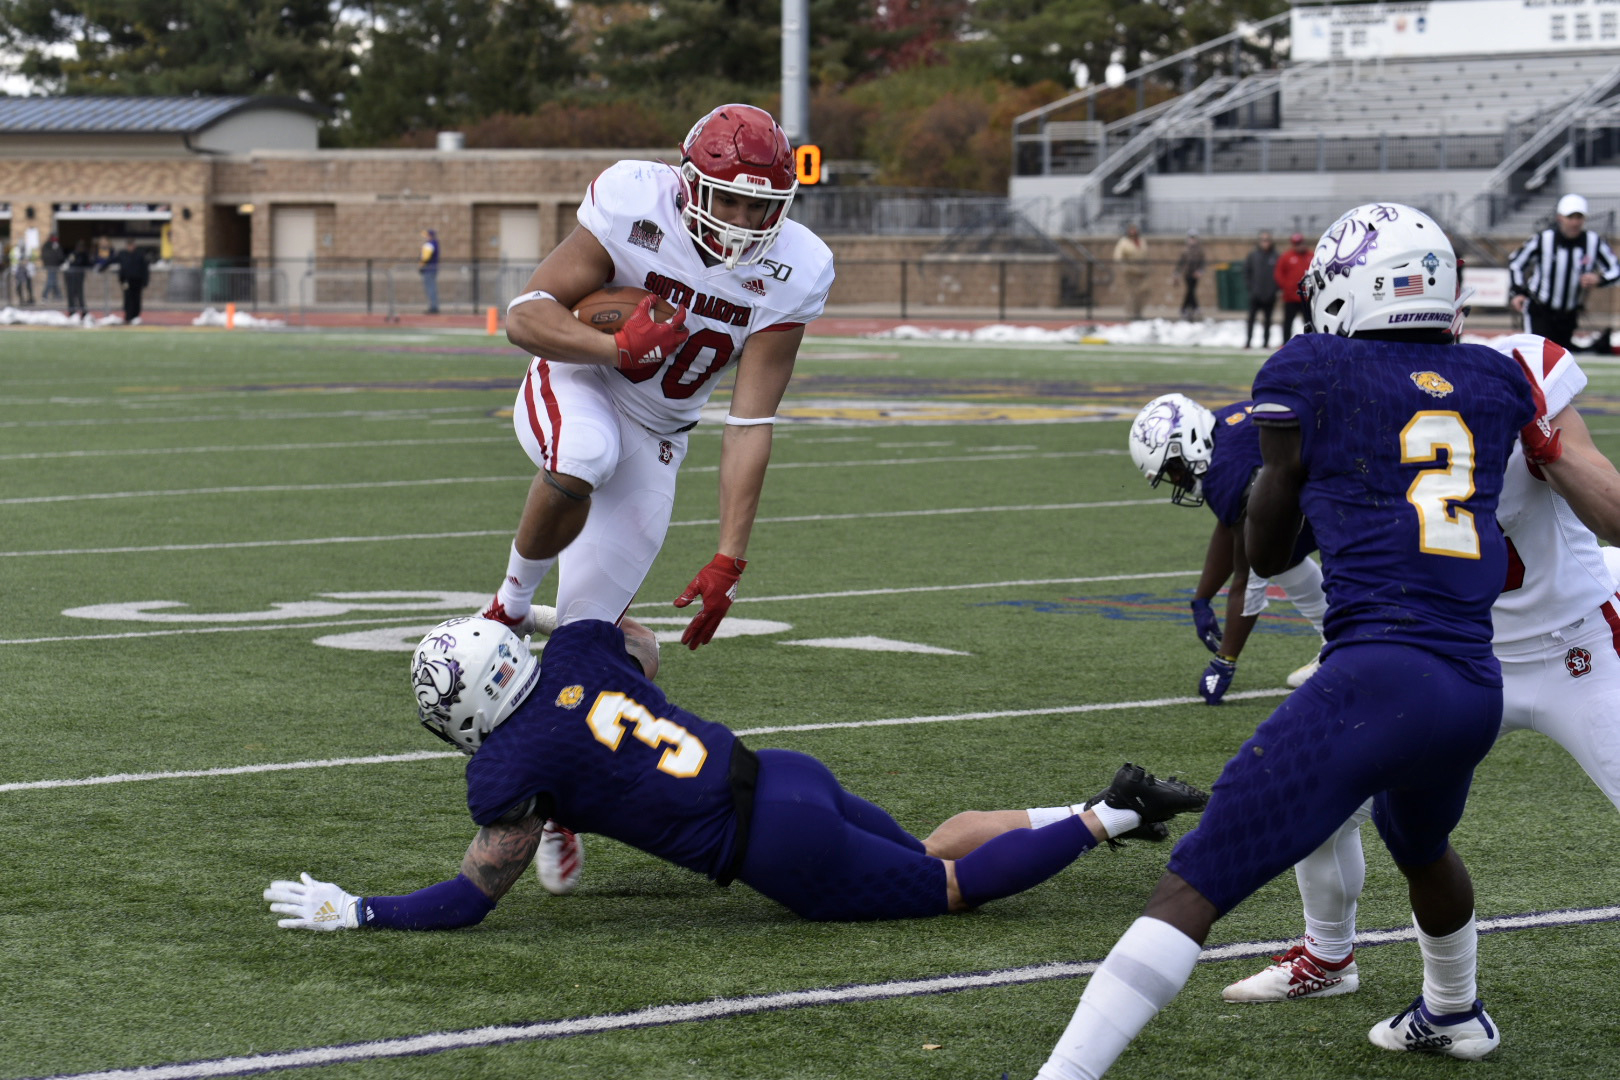 Coyotes fall to winless Leathernecks, back on three-game losing streak